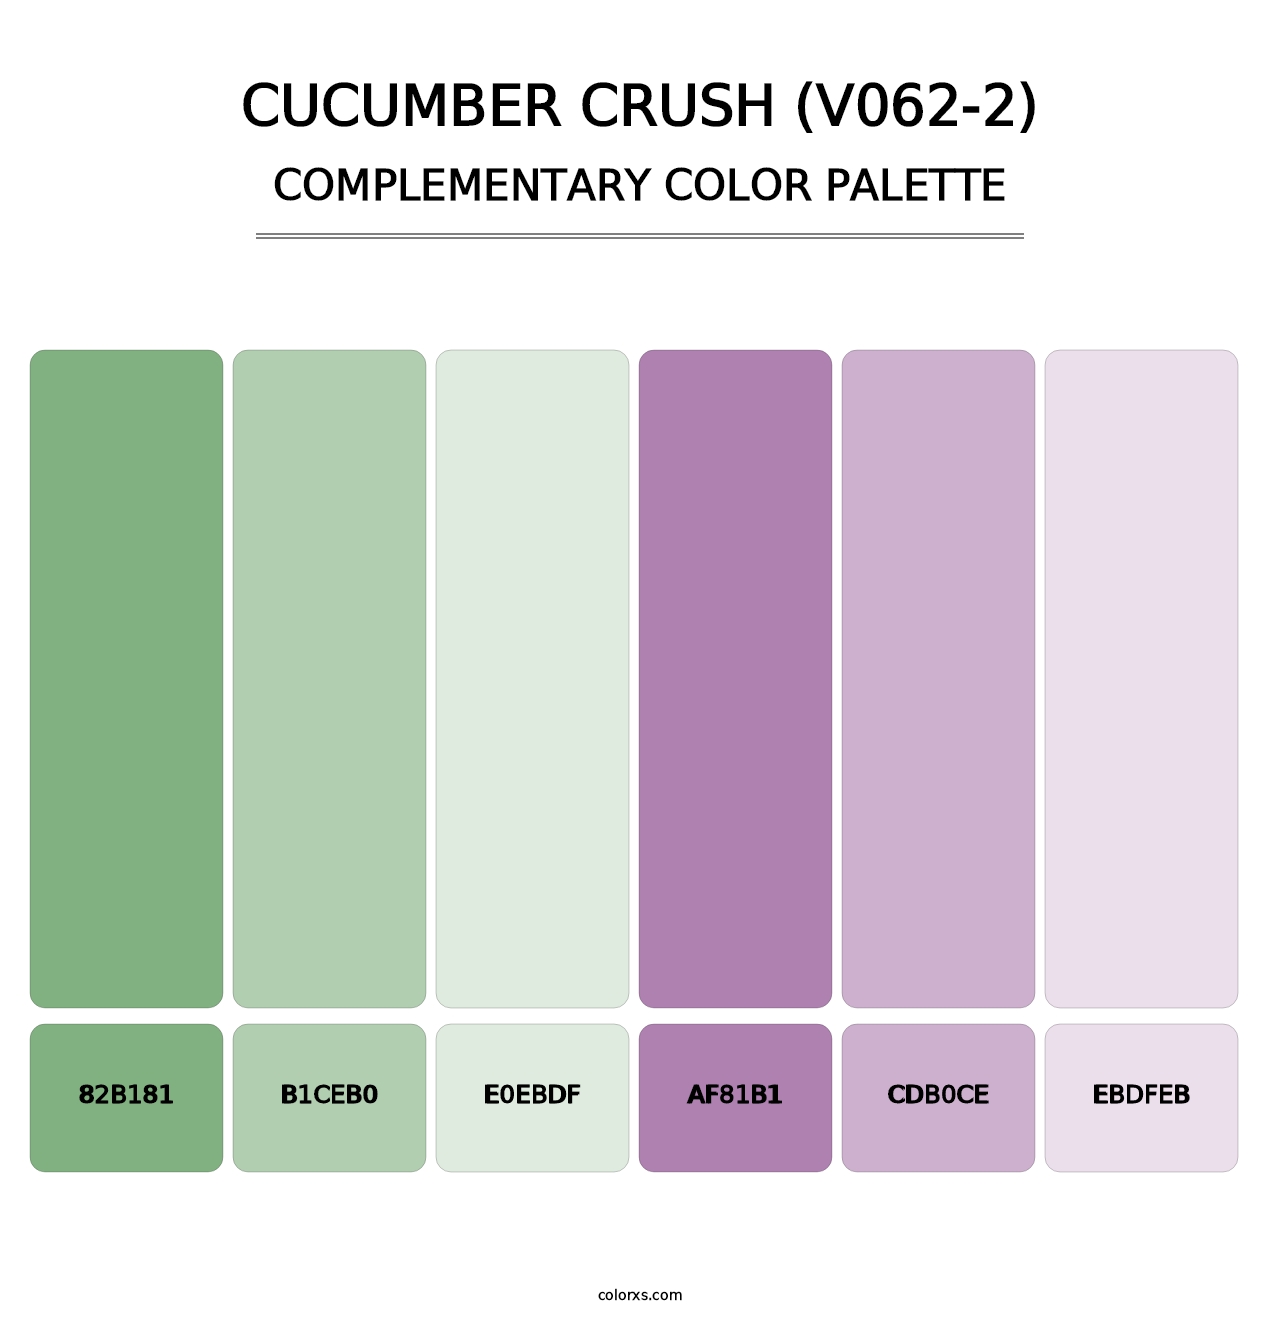 Cucumber Crush (V062-2) - Complementary Color Palette